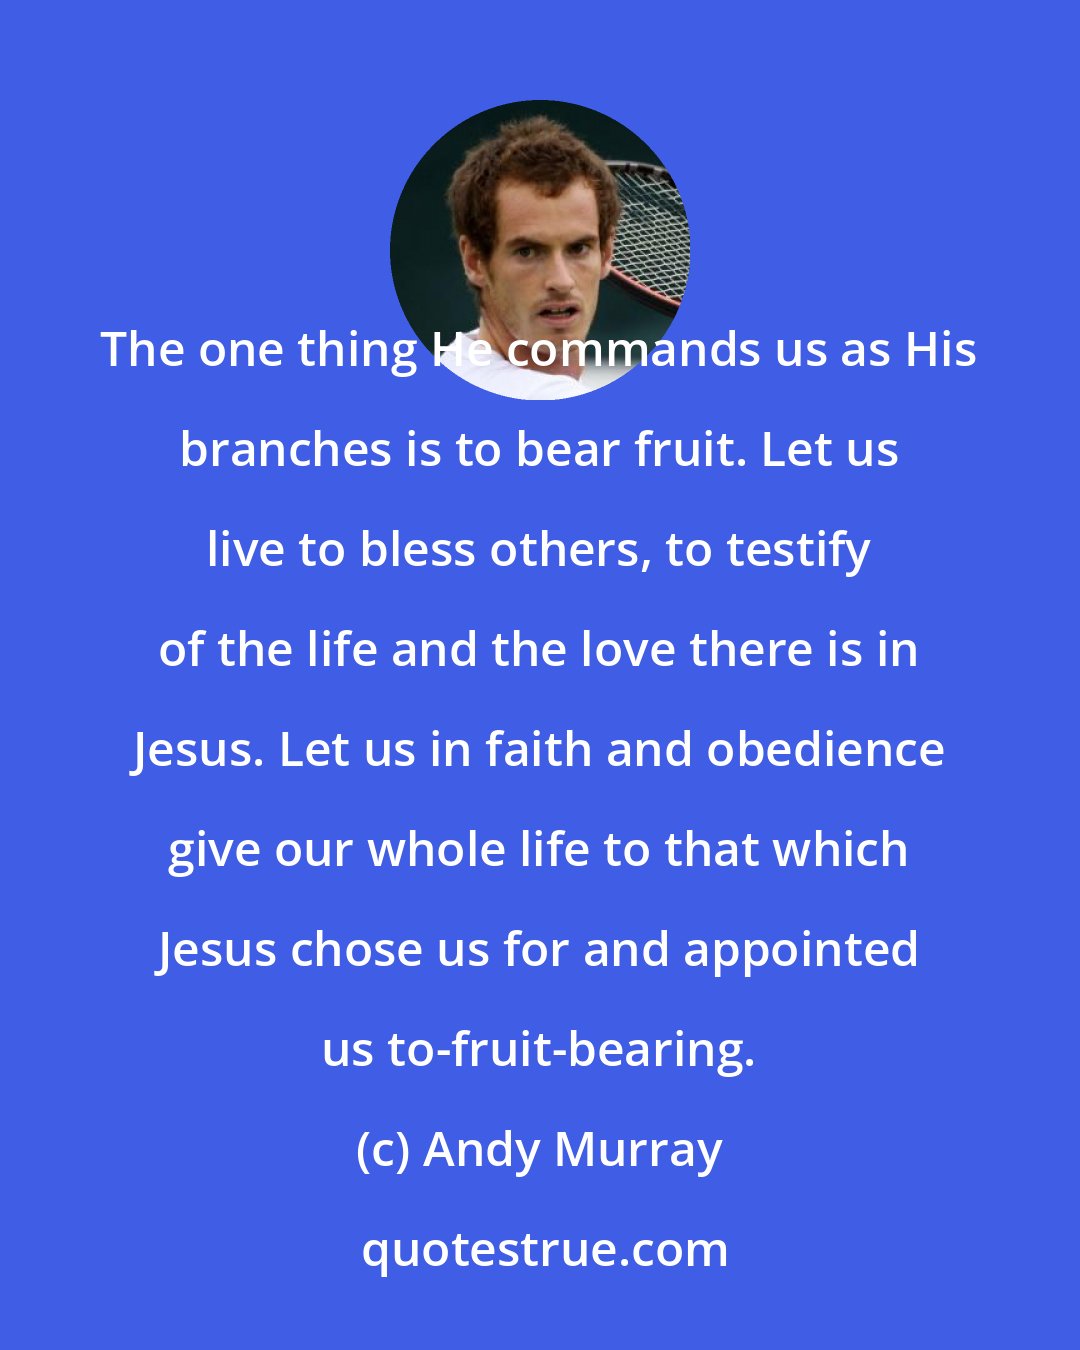 Andy Murray: The one thing He commands us as His branches is to bear fruit. Let us live to bless others, to testify of the life and the love there is in Jesus. Let us in faith and obedience give our whole life to that which Jesus chose us for and appointed us to-fruit-bearing.